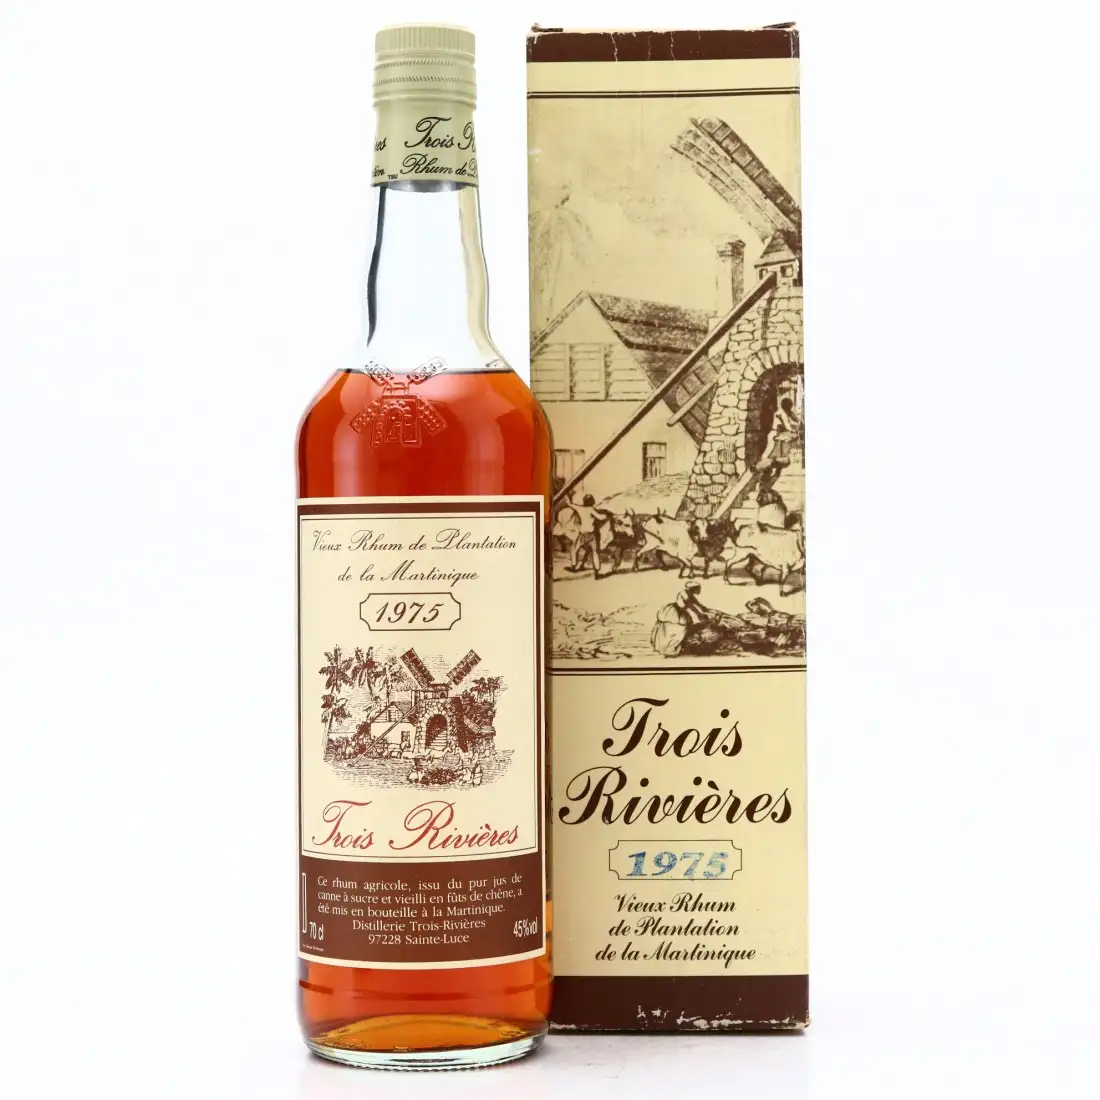 Image of the front of the bottle of the rum Millésime 1975